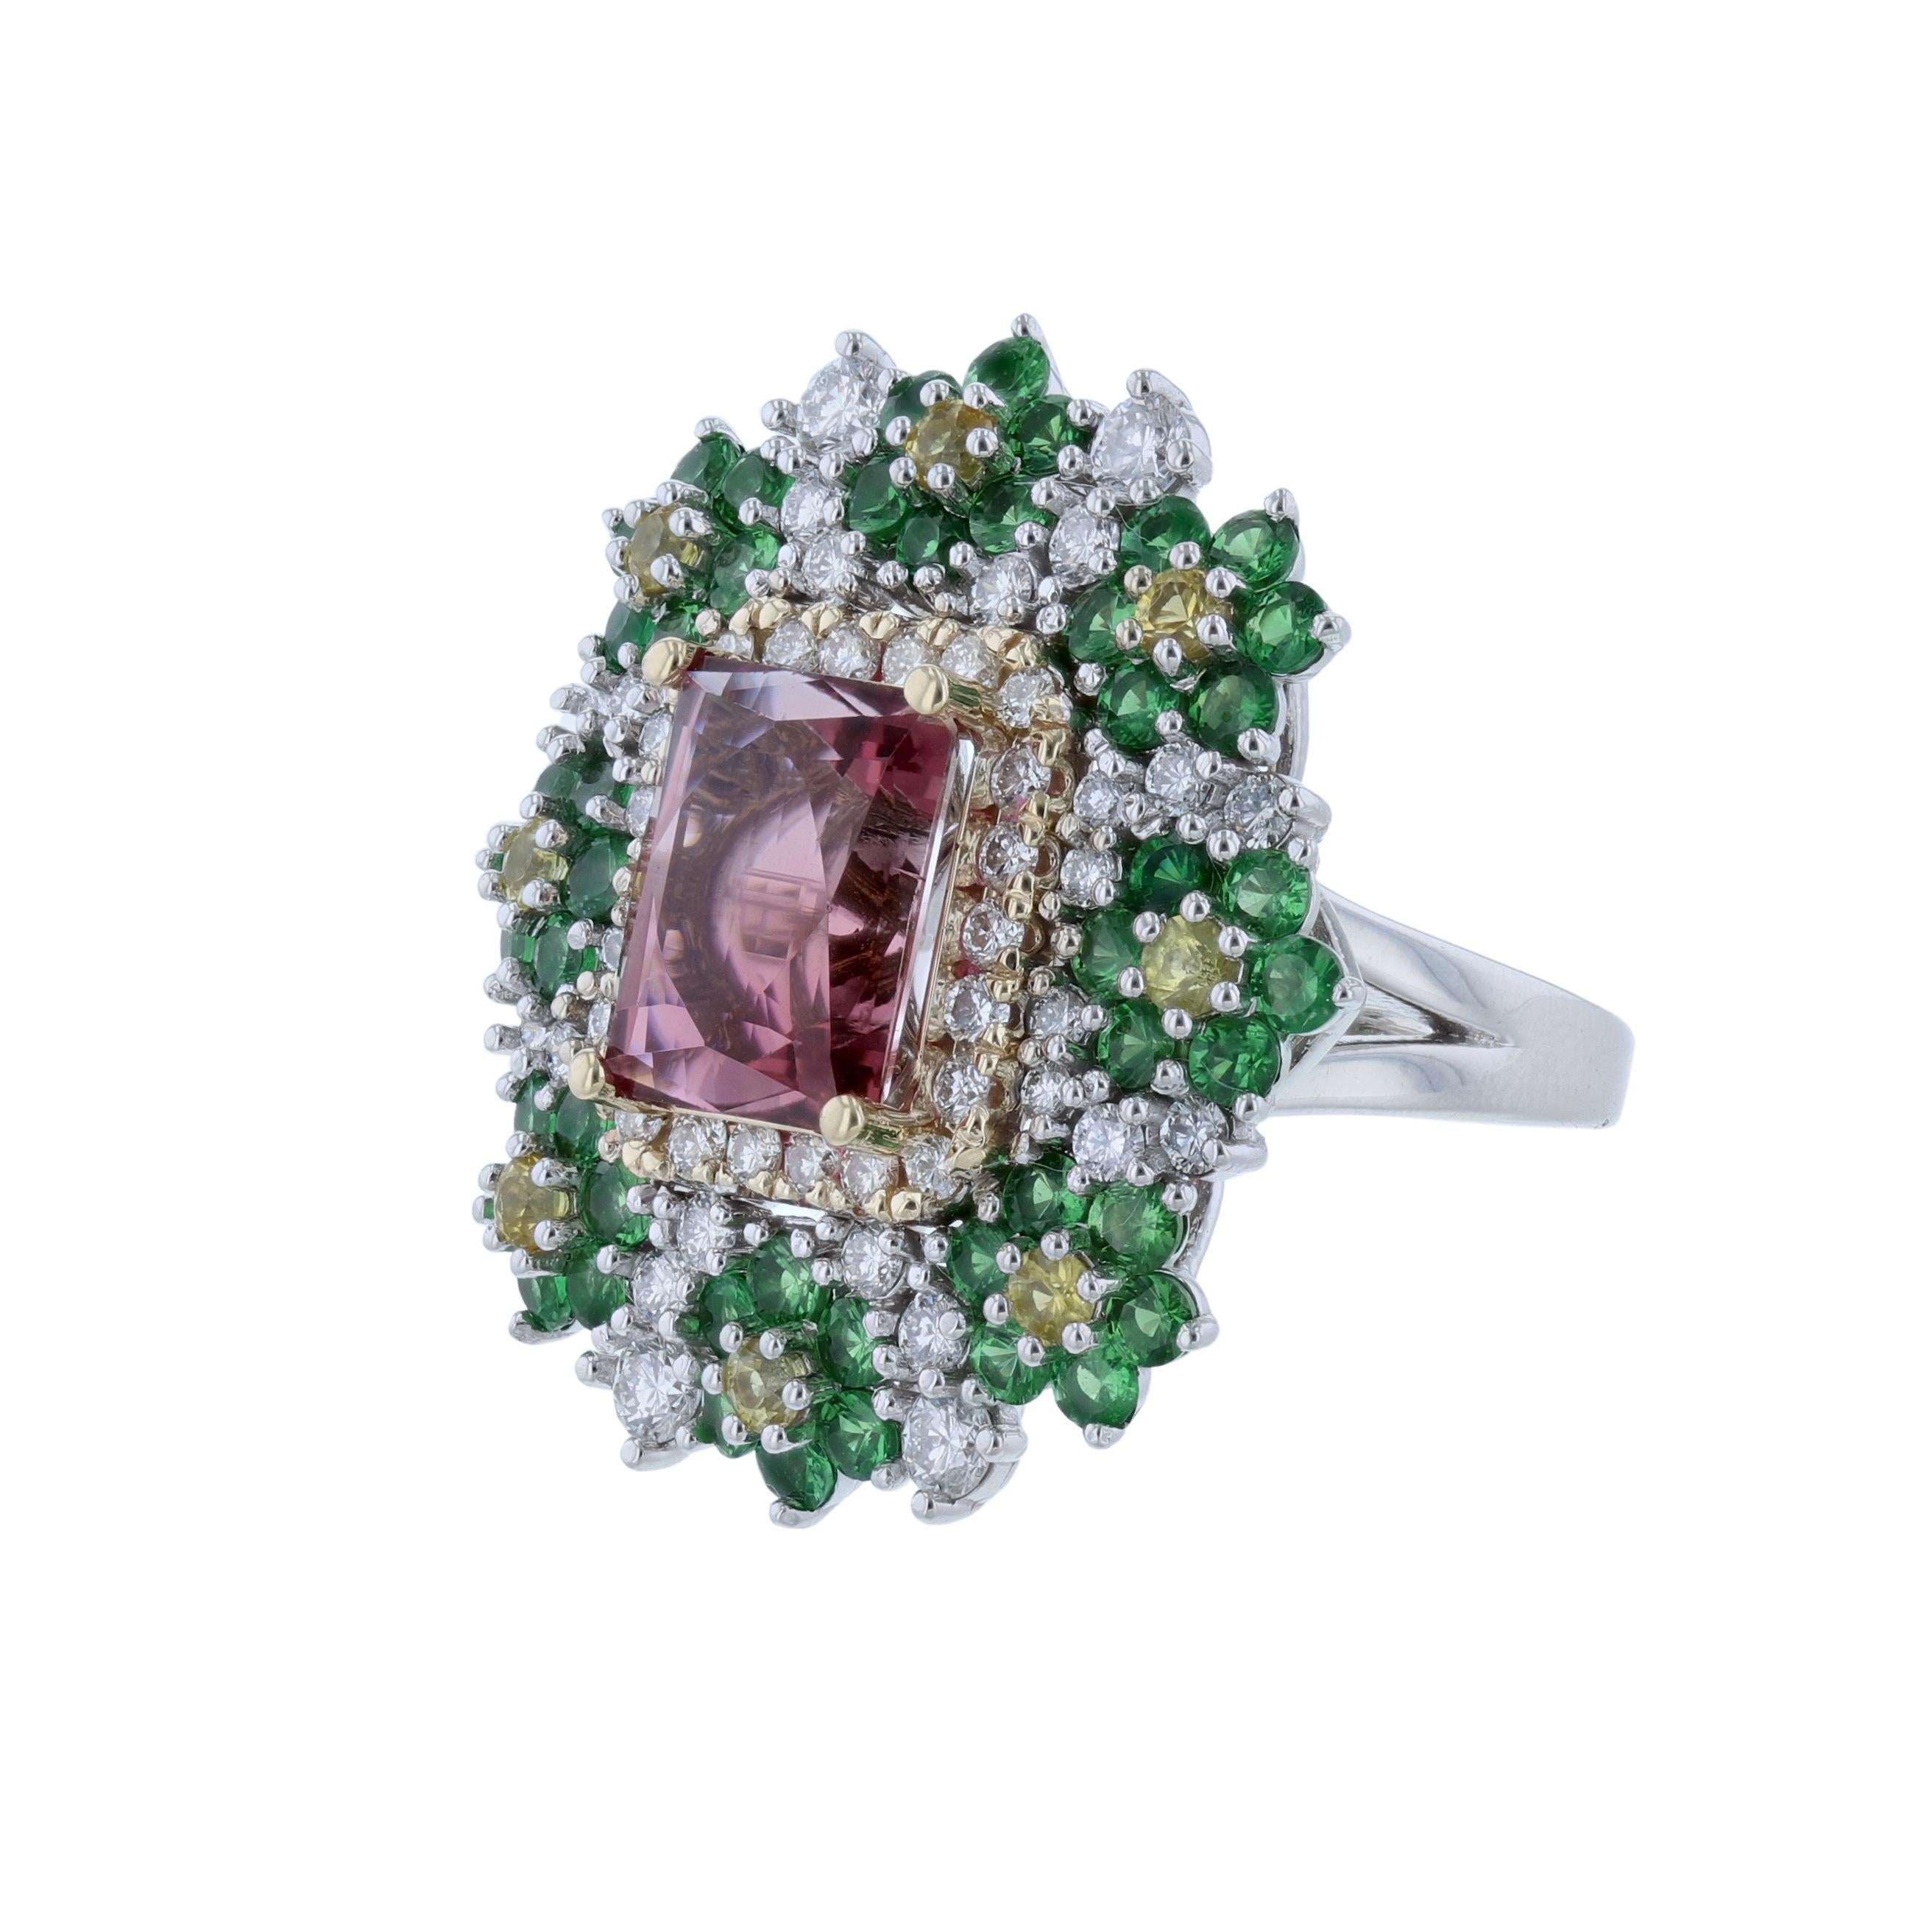 This ring is made of 14K white and yellow gold. It features 1 emerald cut pink tourmaline center stone weighing 5.40. Surrounded by 50 round cut diamonds weighing 1.45 carats, 48 round tsavorite weighing 2.67 carats, and 8 yellow sapphires weighing